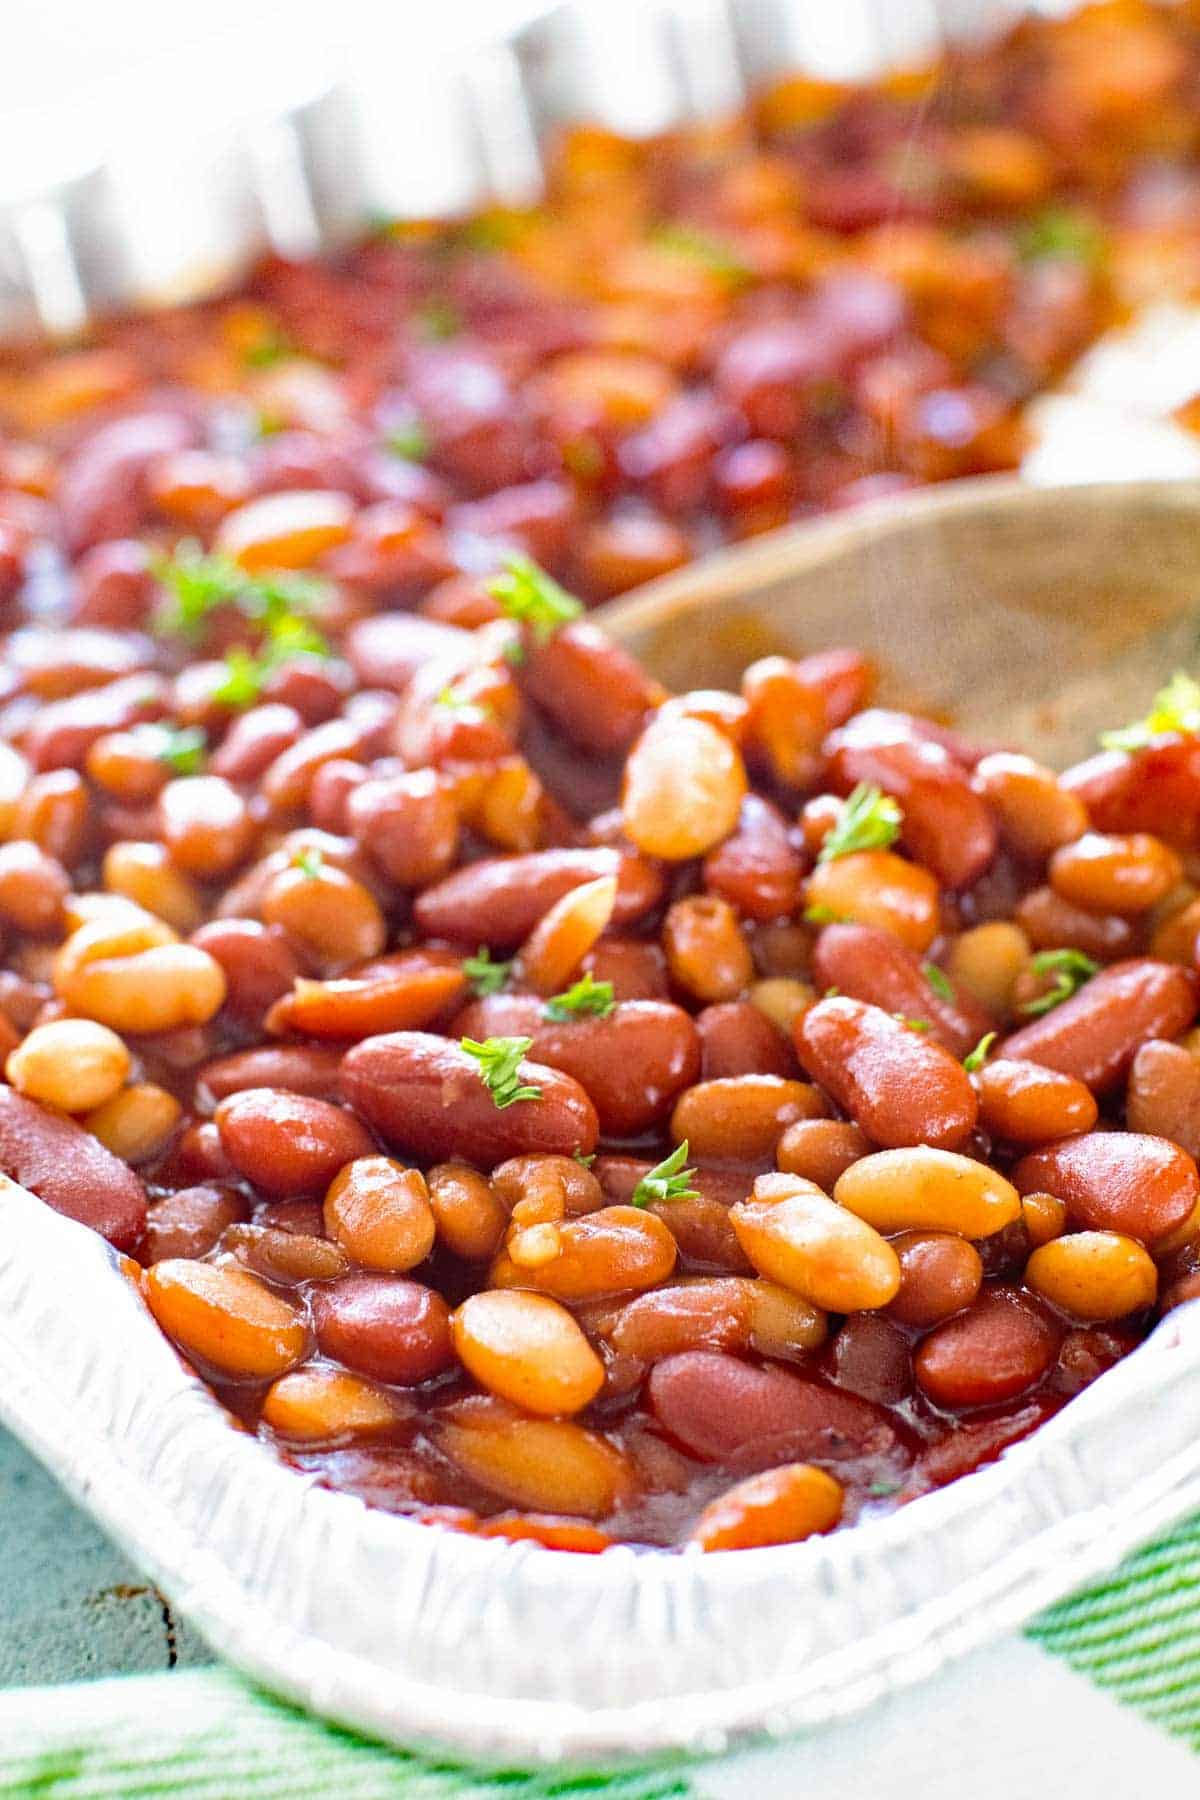 BBQ Baked Beans On the Grill